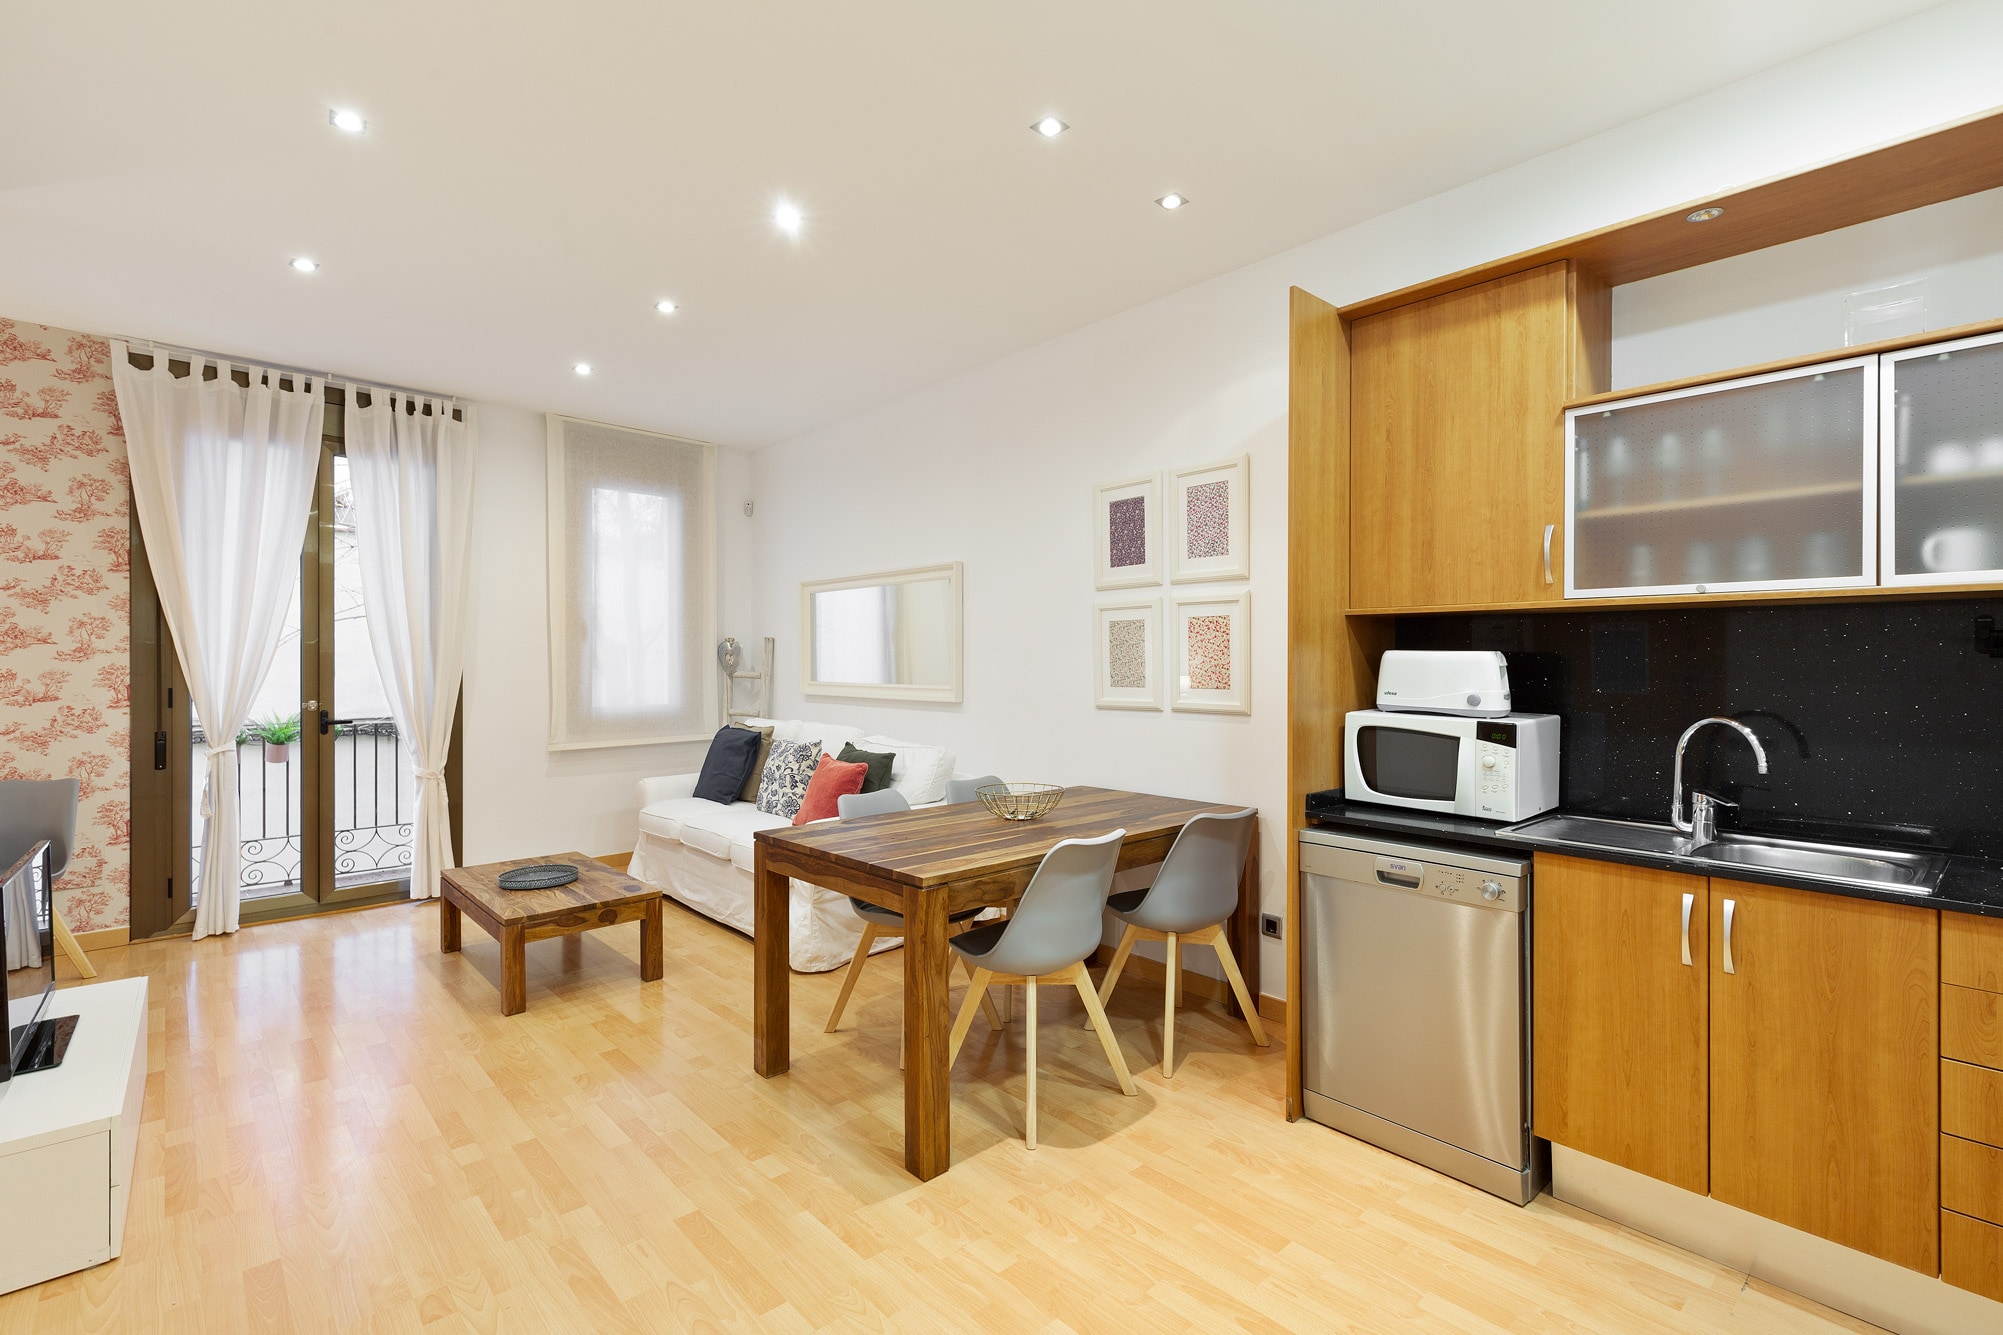 Property Image 2 - Amazing apartment with balcony in the heart of Gracia